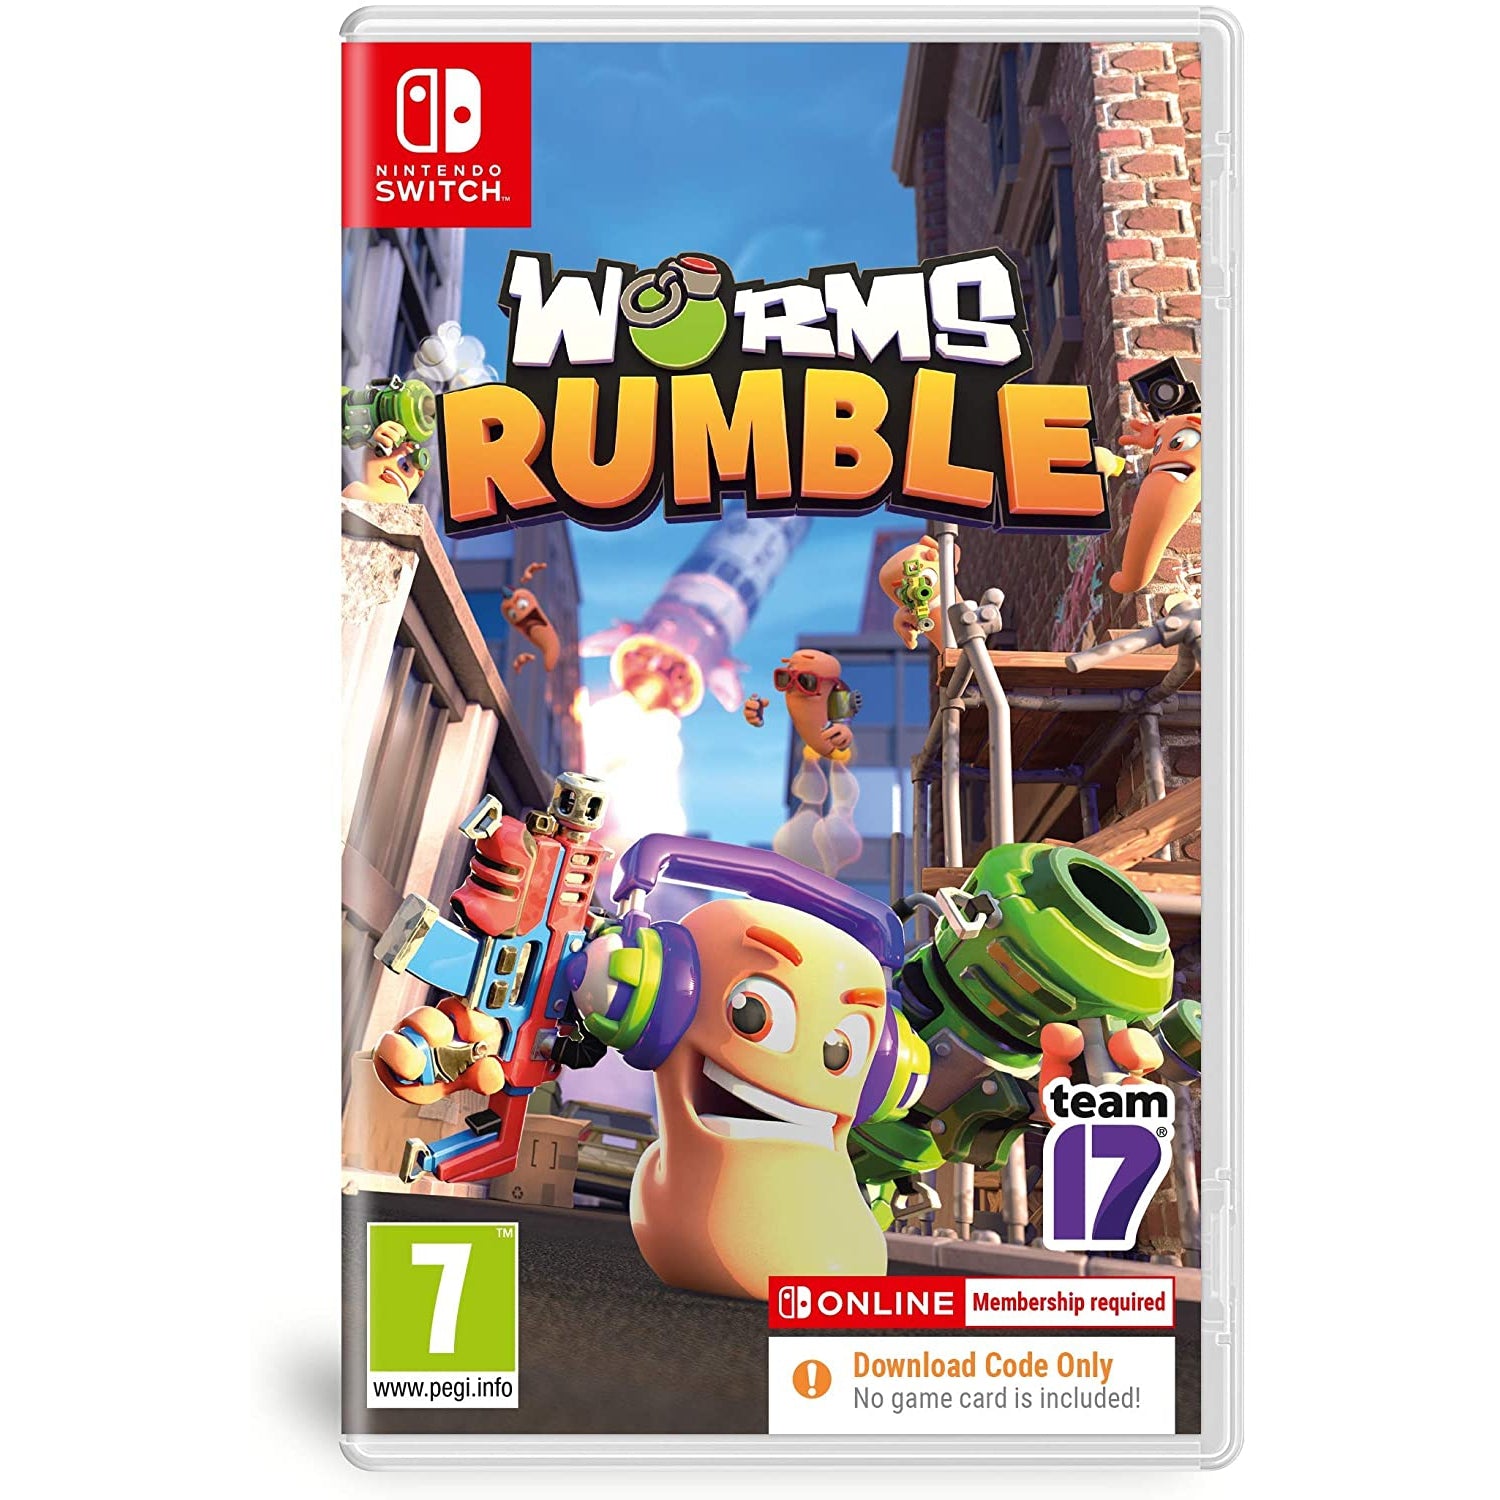 Worms Rumble (Nintendo Switch) - Digital Code Only